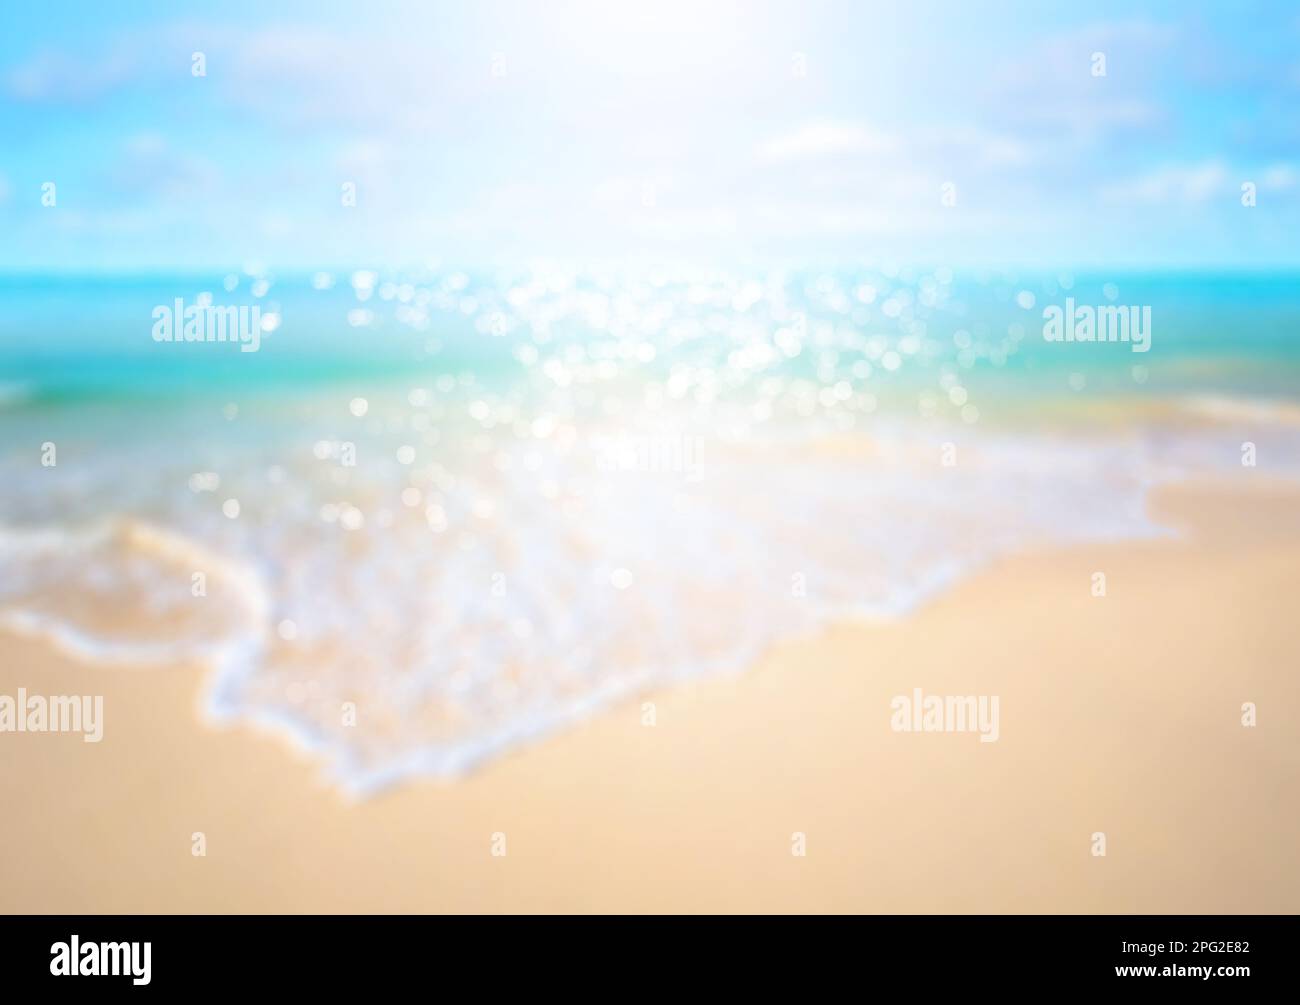 Blurred Abstract Art, Blue Sea And Sandy Tropical Beach. Background For Summer Vacation Holidays Banner Stock Photo